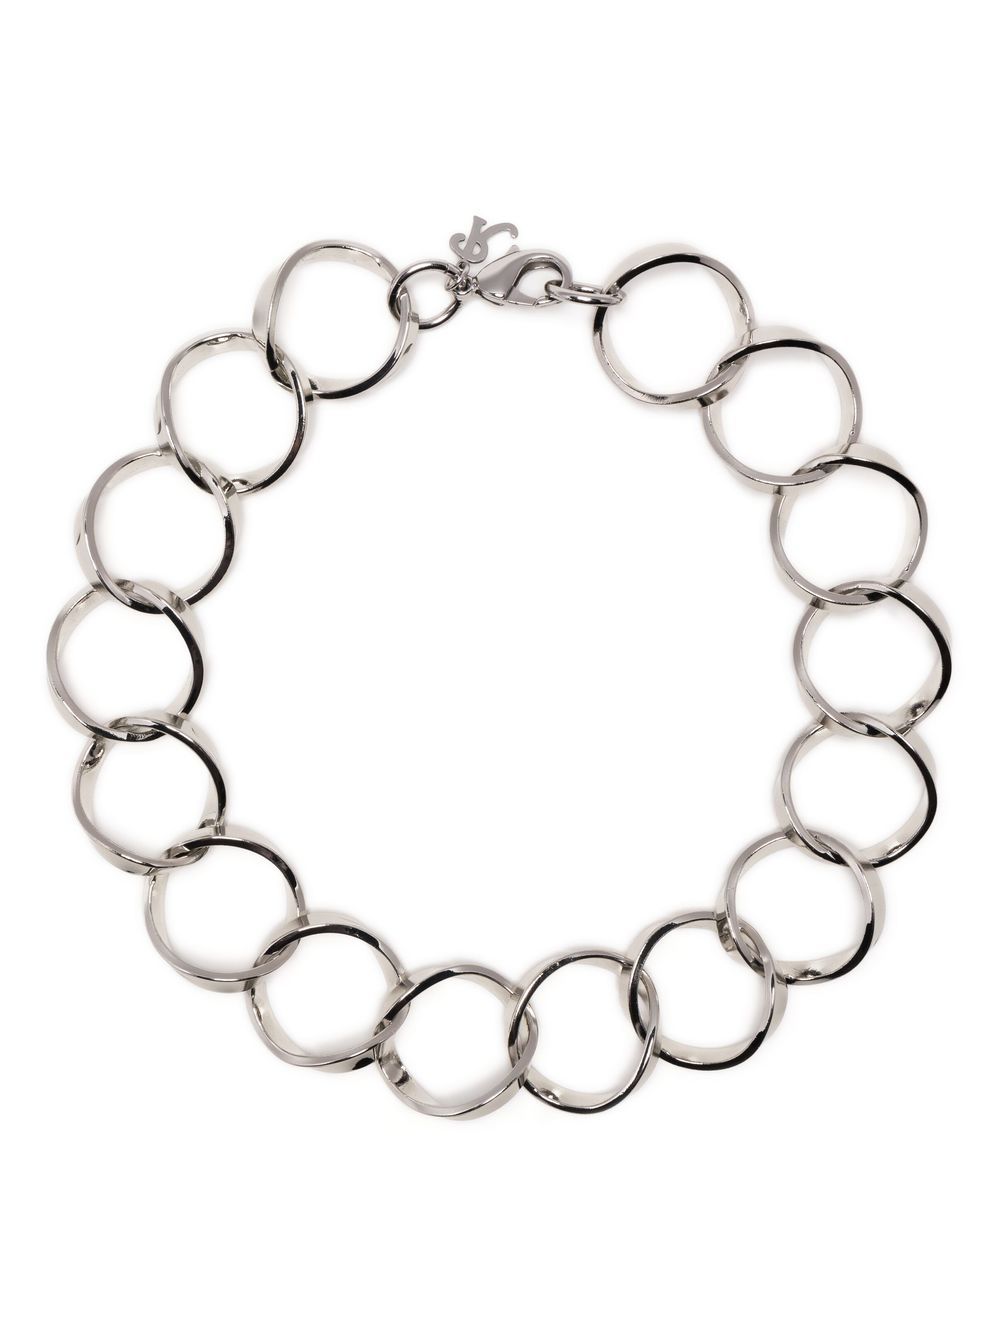 RAF SIMONS SILVER-PLATED CHOKER NECKLACE